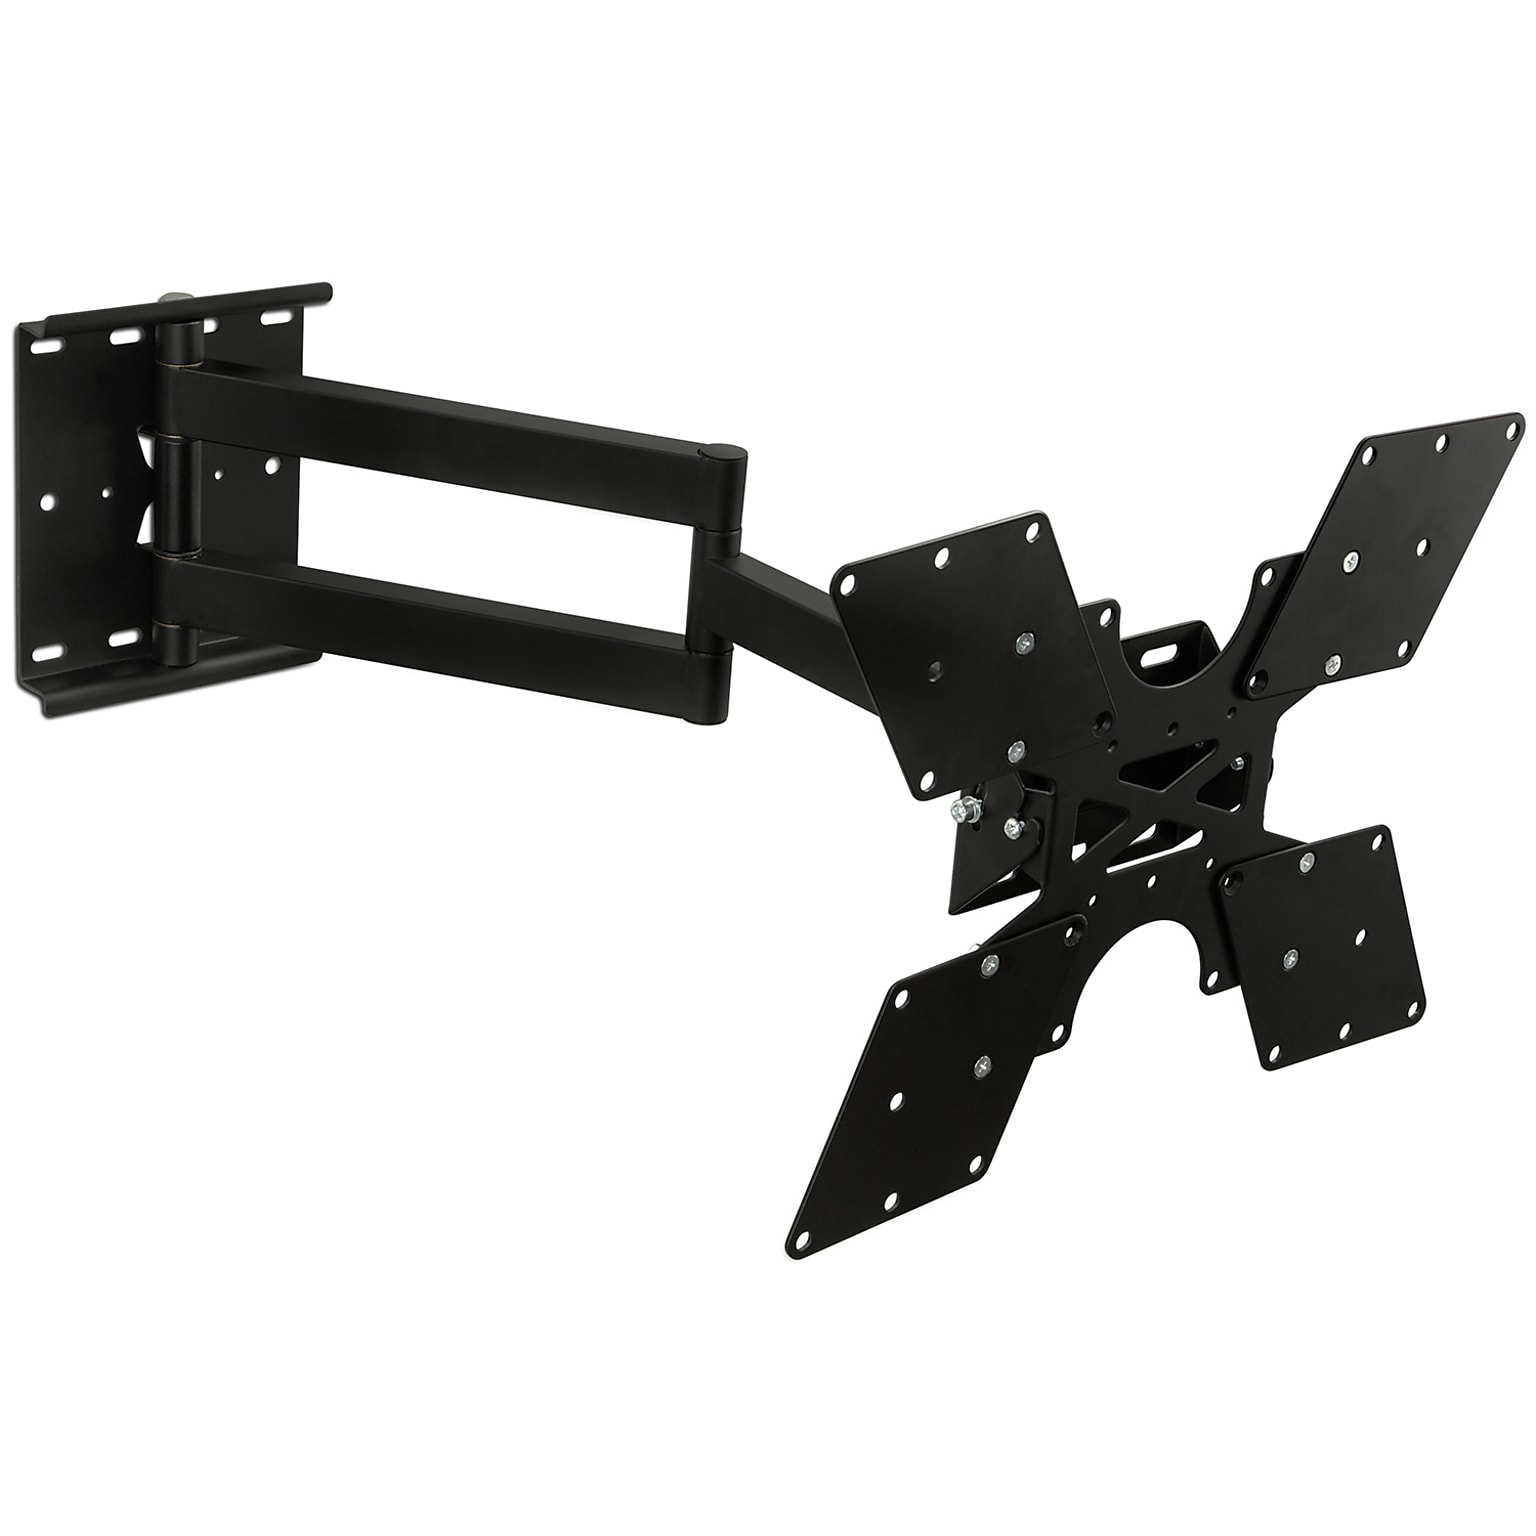 Mount-It! Articulating Full Motion TV Wall Mount for 32 to 52 TVs (MI-411L)